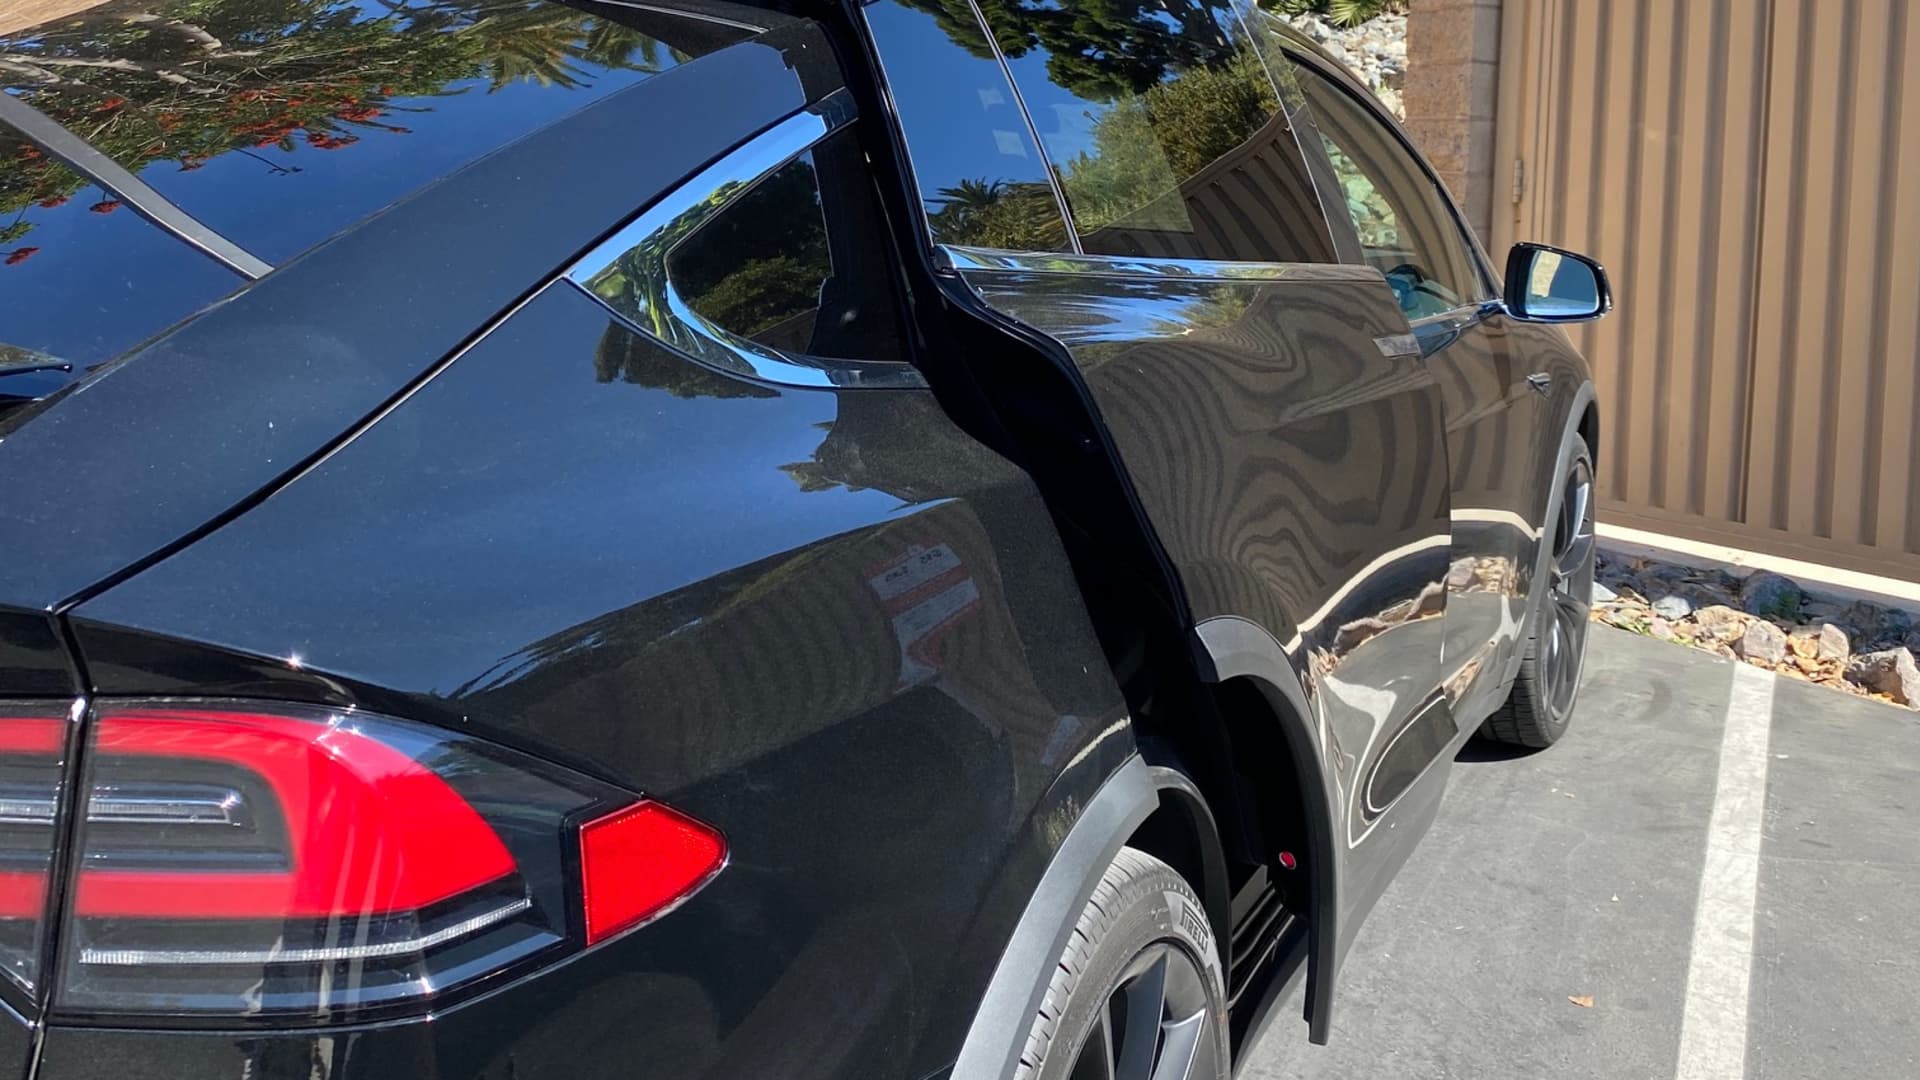 Danny Roman's Tesla Model X had battery, and door issues that lead him to return it to the electric vehicle maker in 2020.